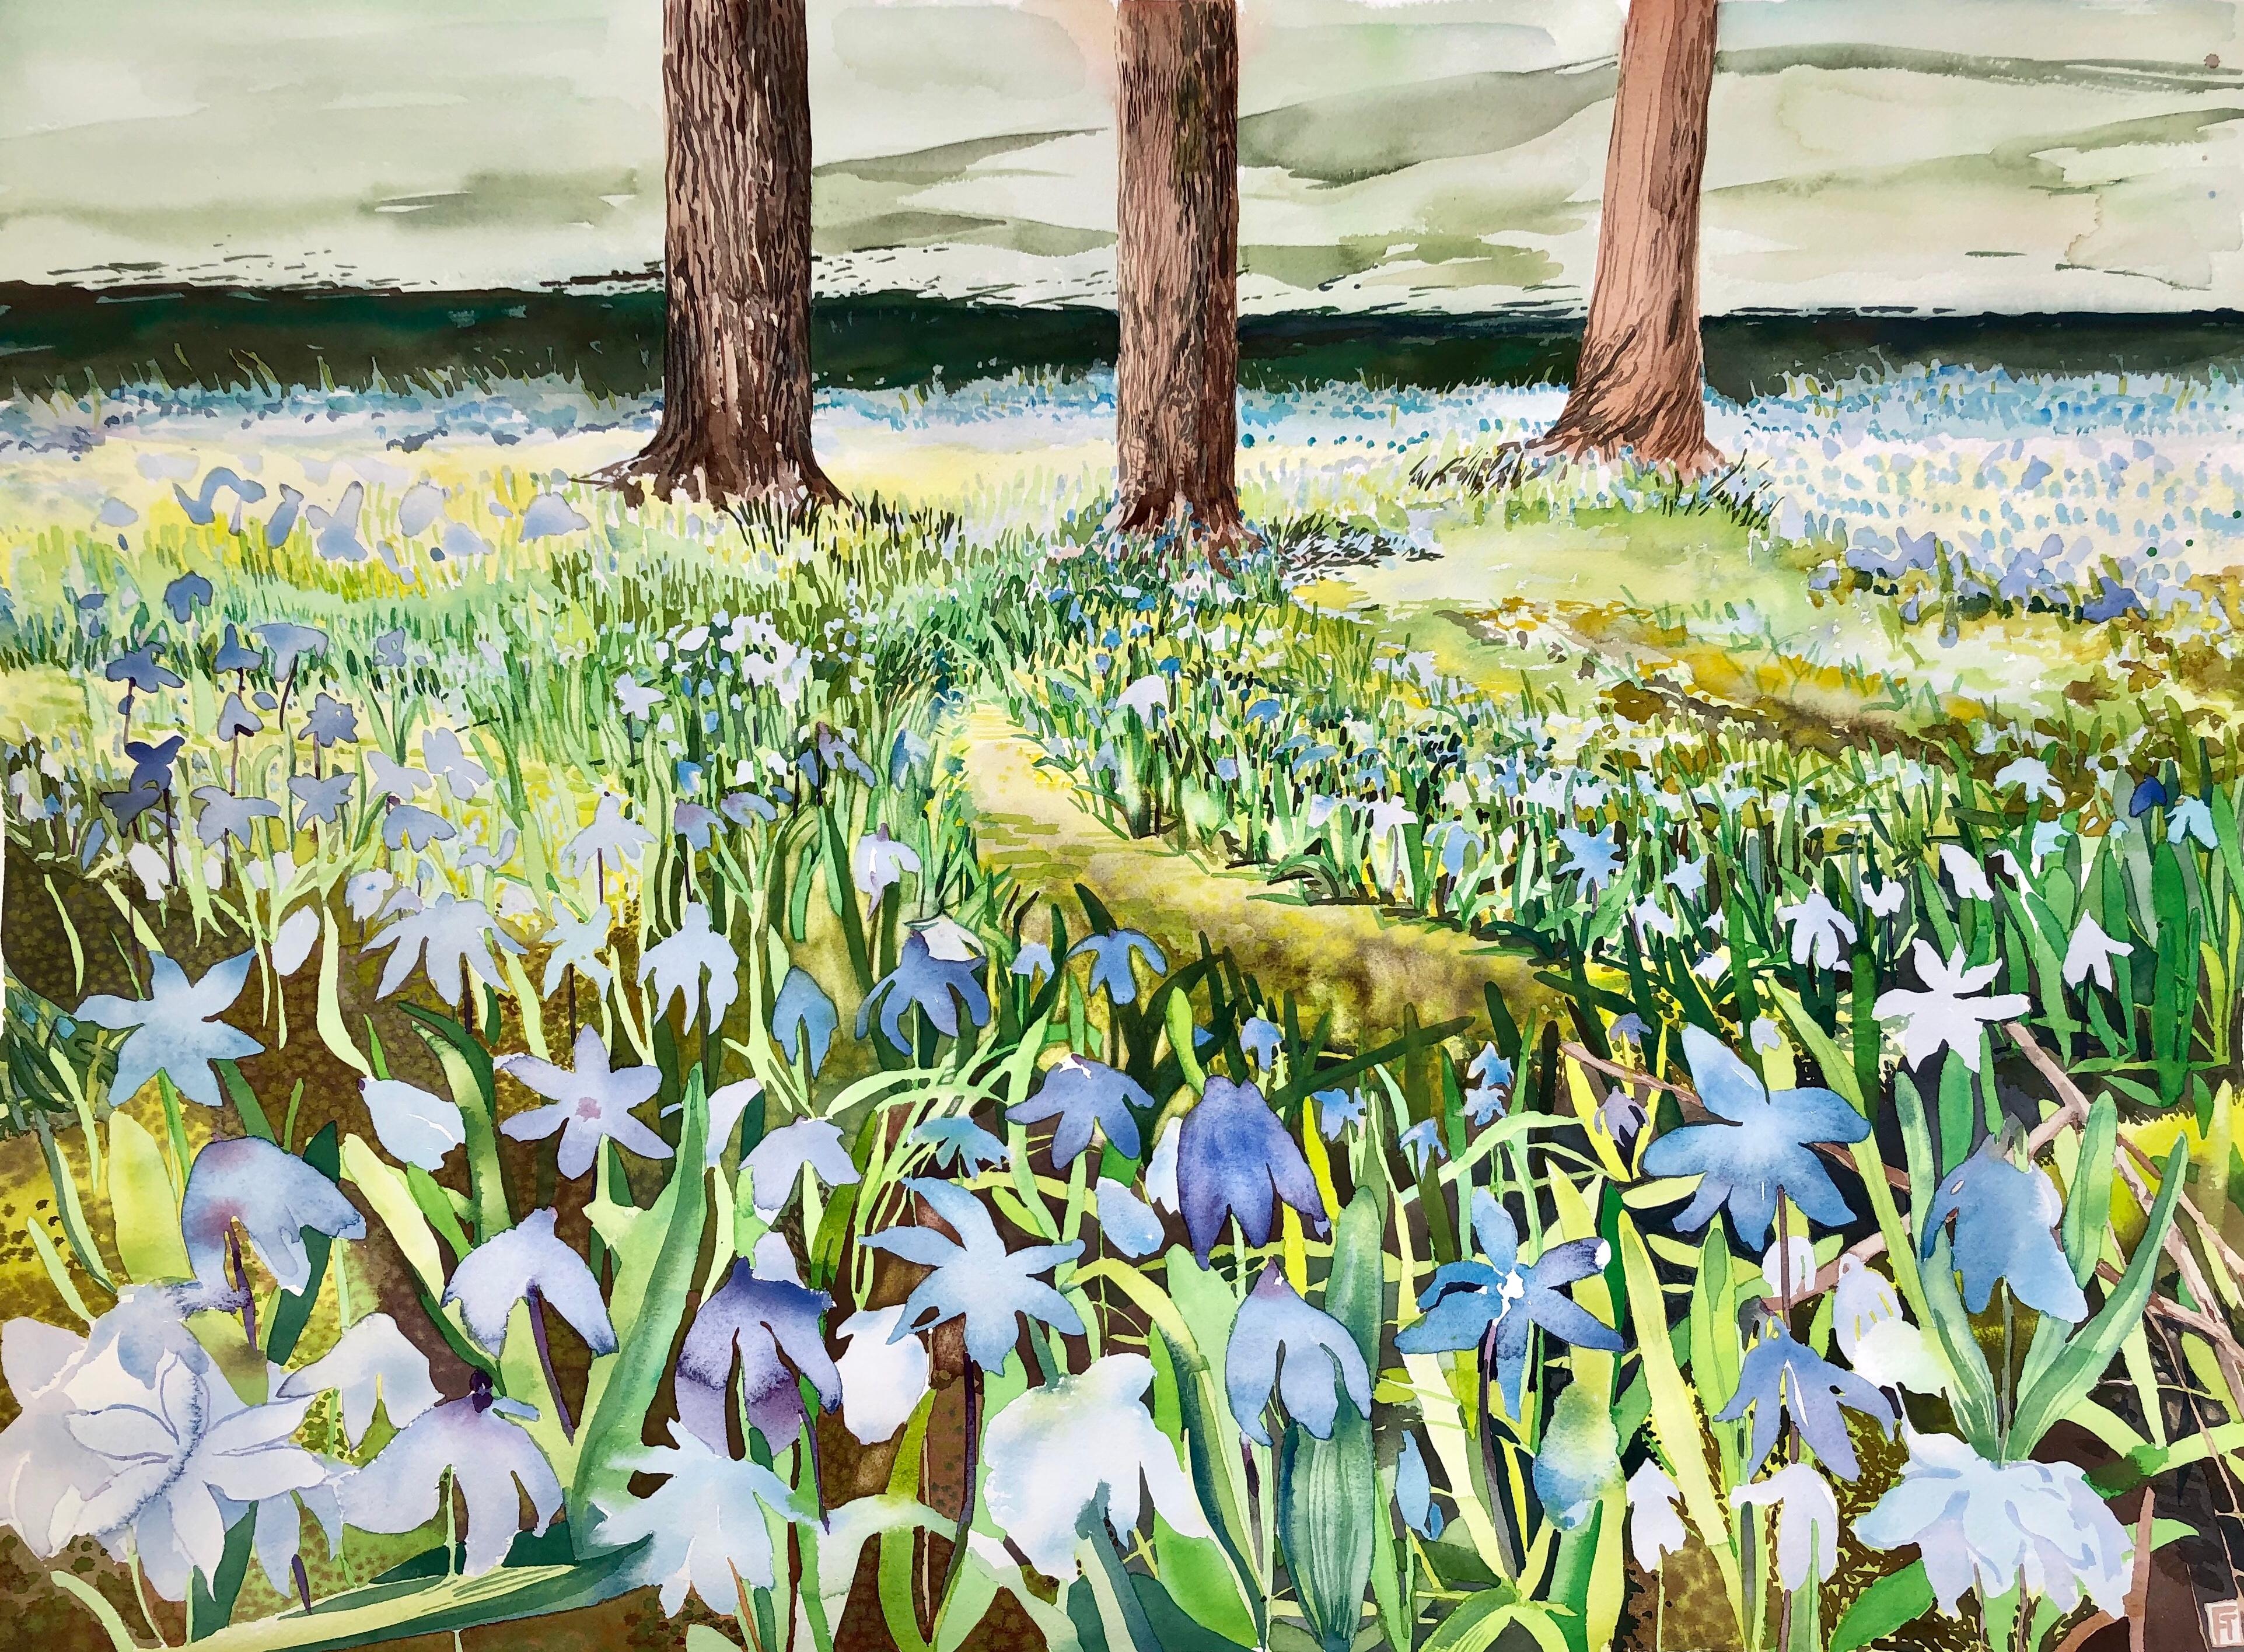 "HOPE", watercolor, spring, snow flowers, trees, moss, gardens, flora, nature